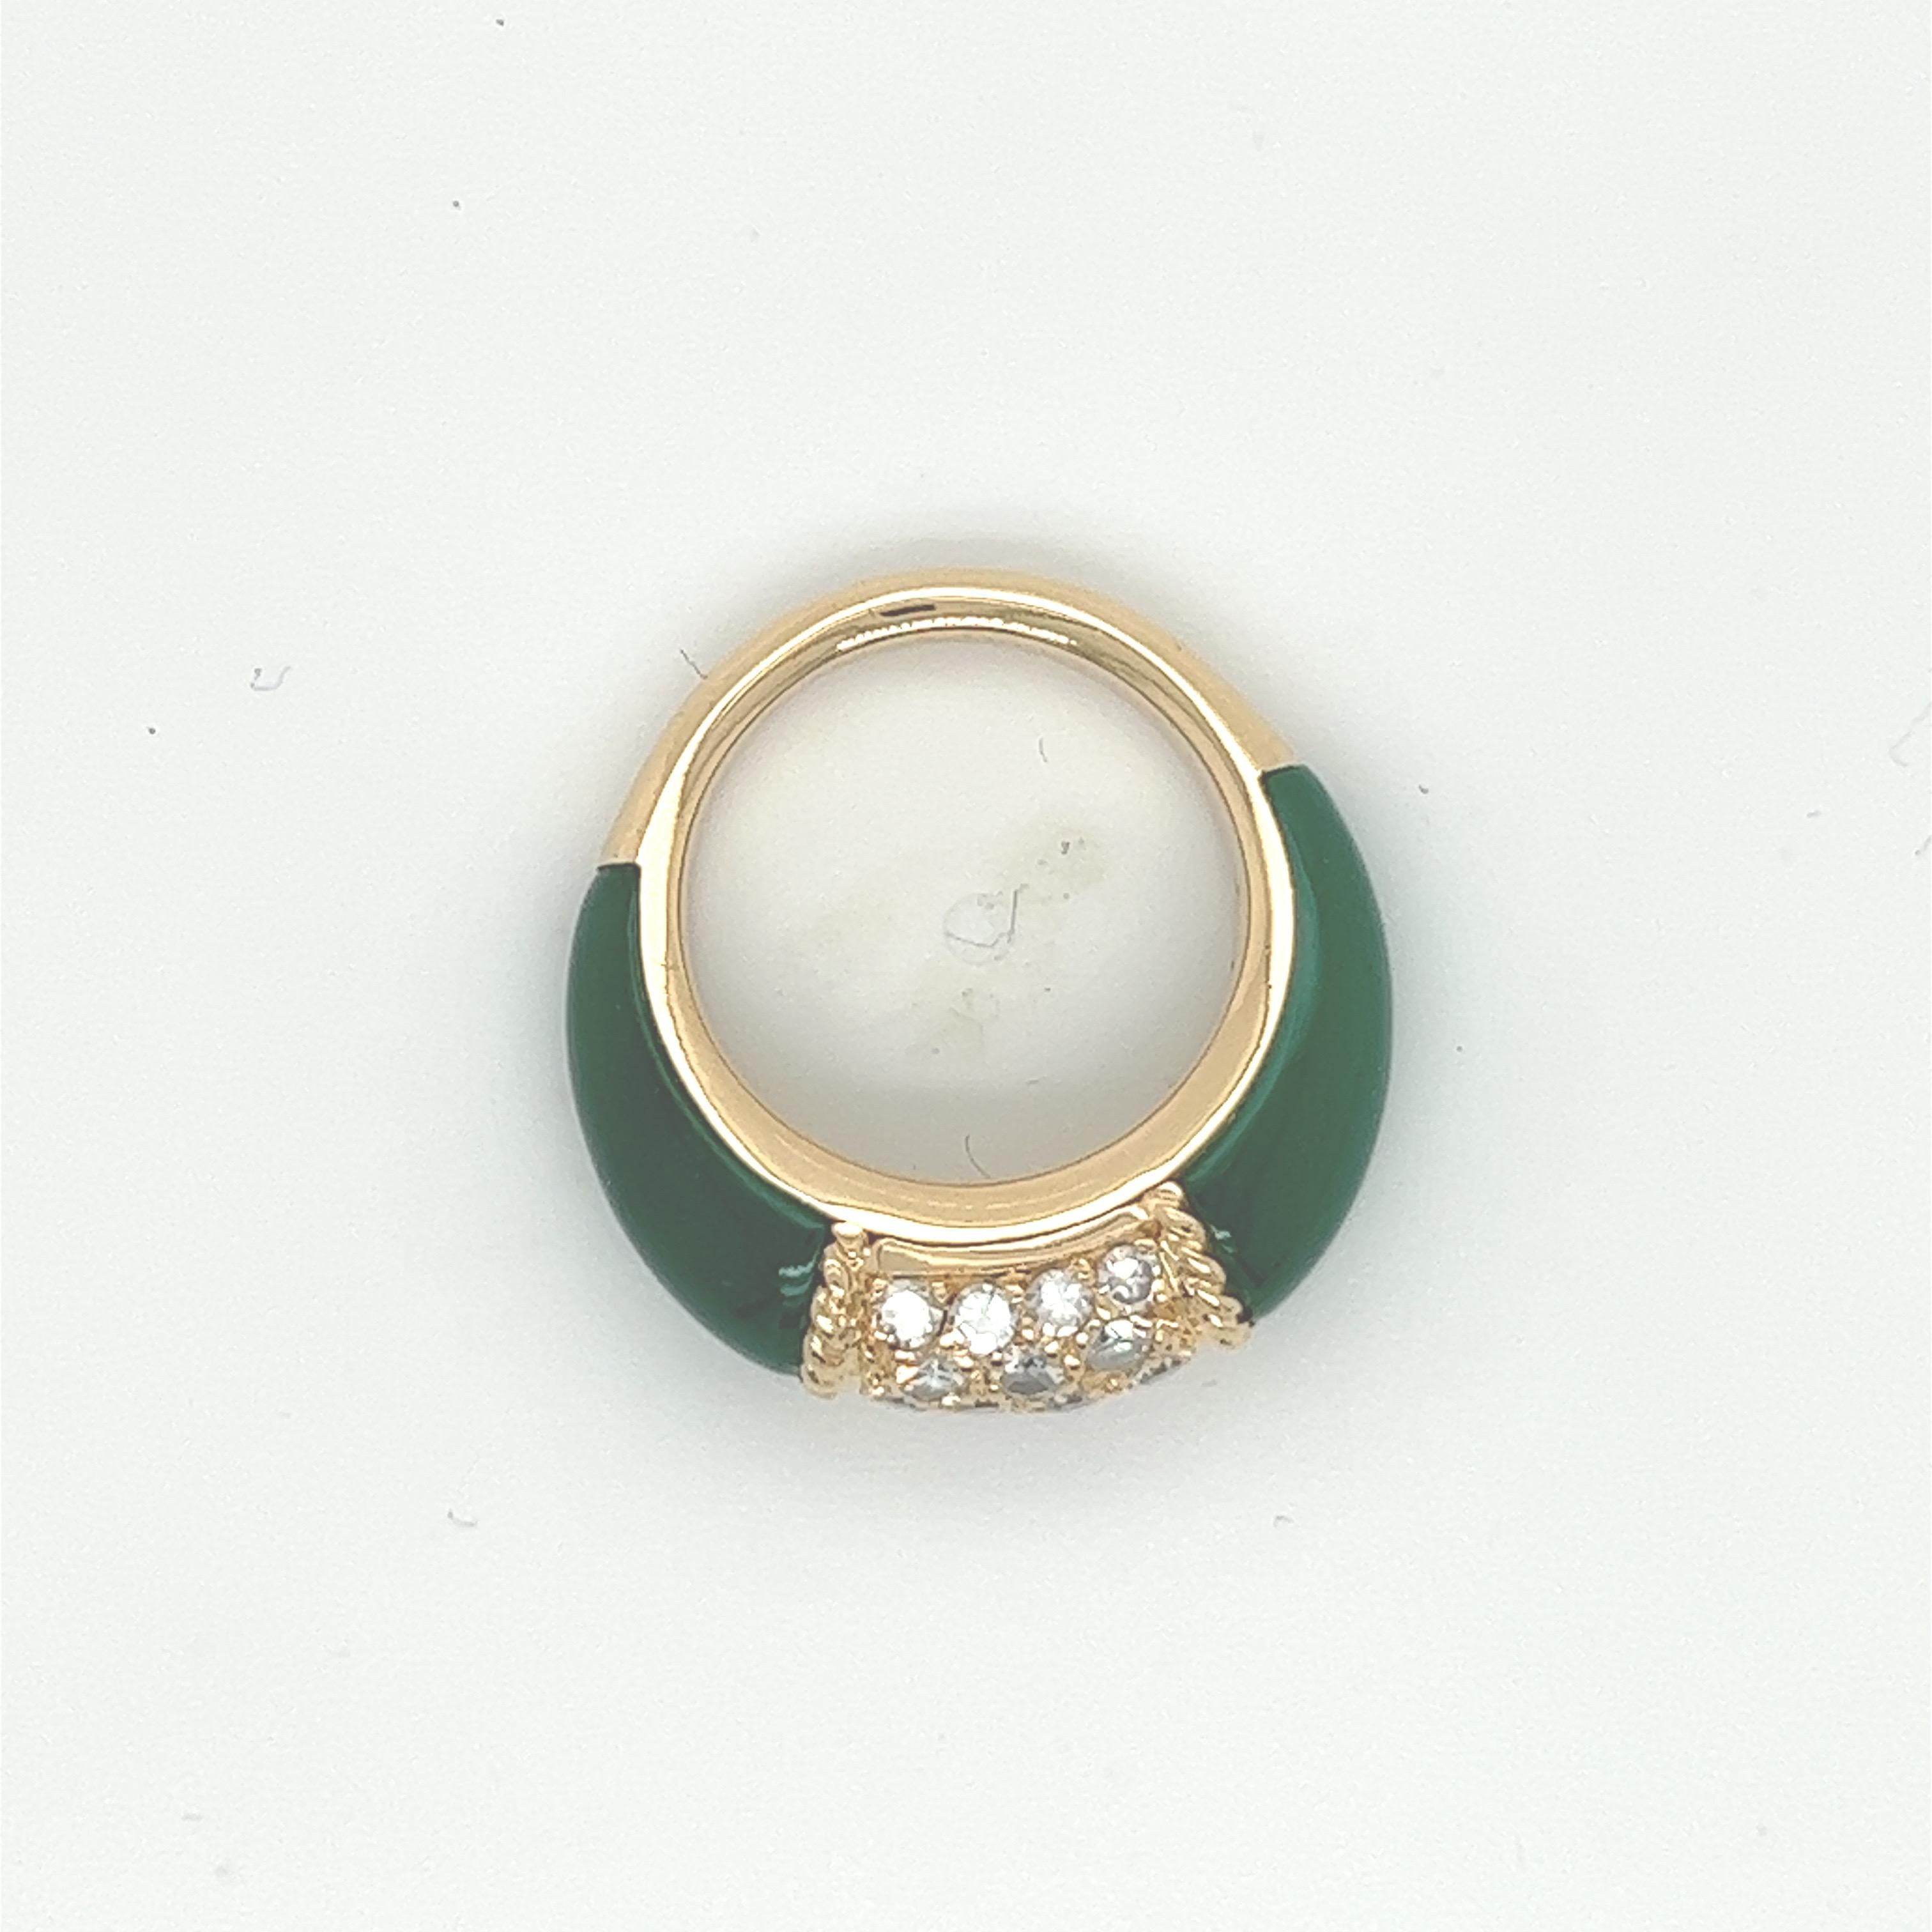 Brilliant Cut  Rare Van Cleef & Arpels Chrysoprase and Diamond Ring Set in 18ct Yellow Gold For Sale